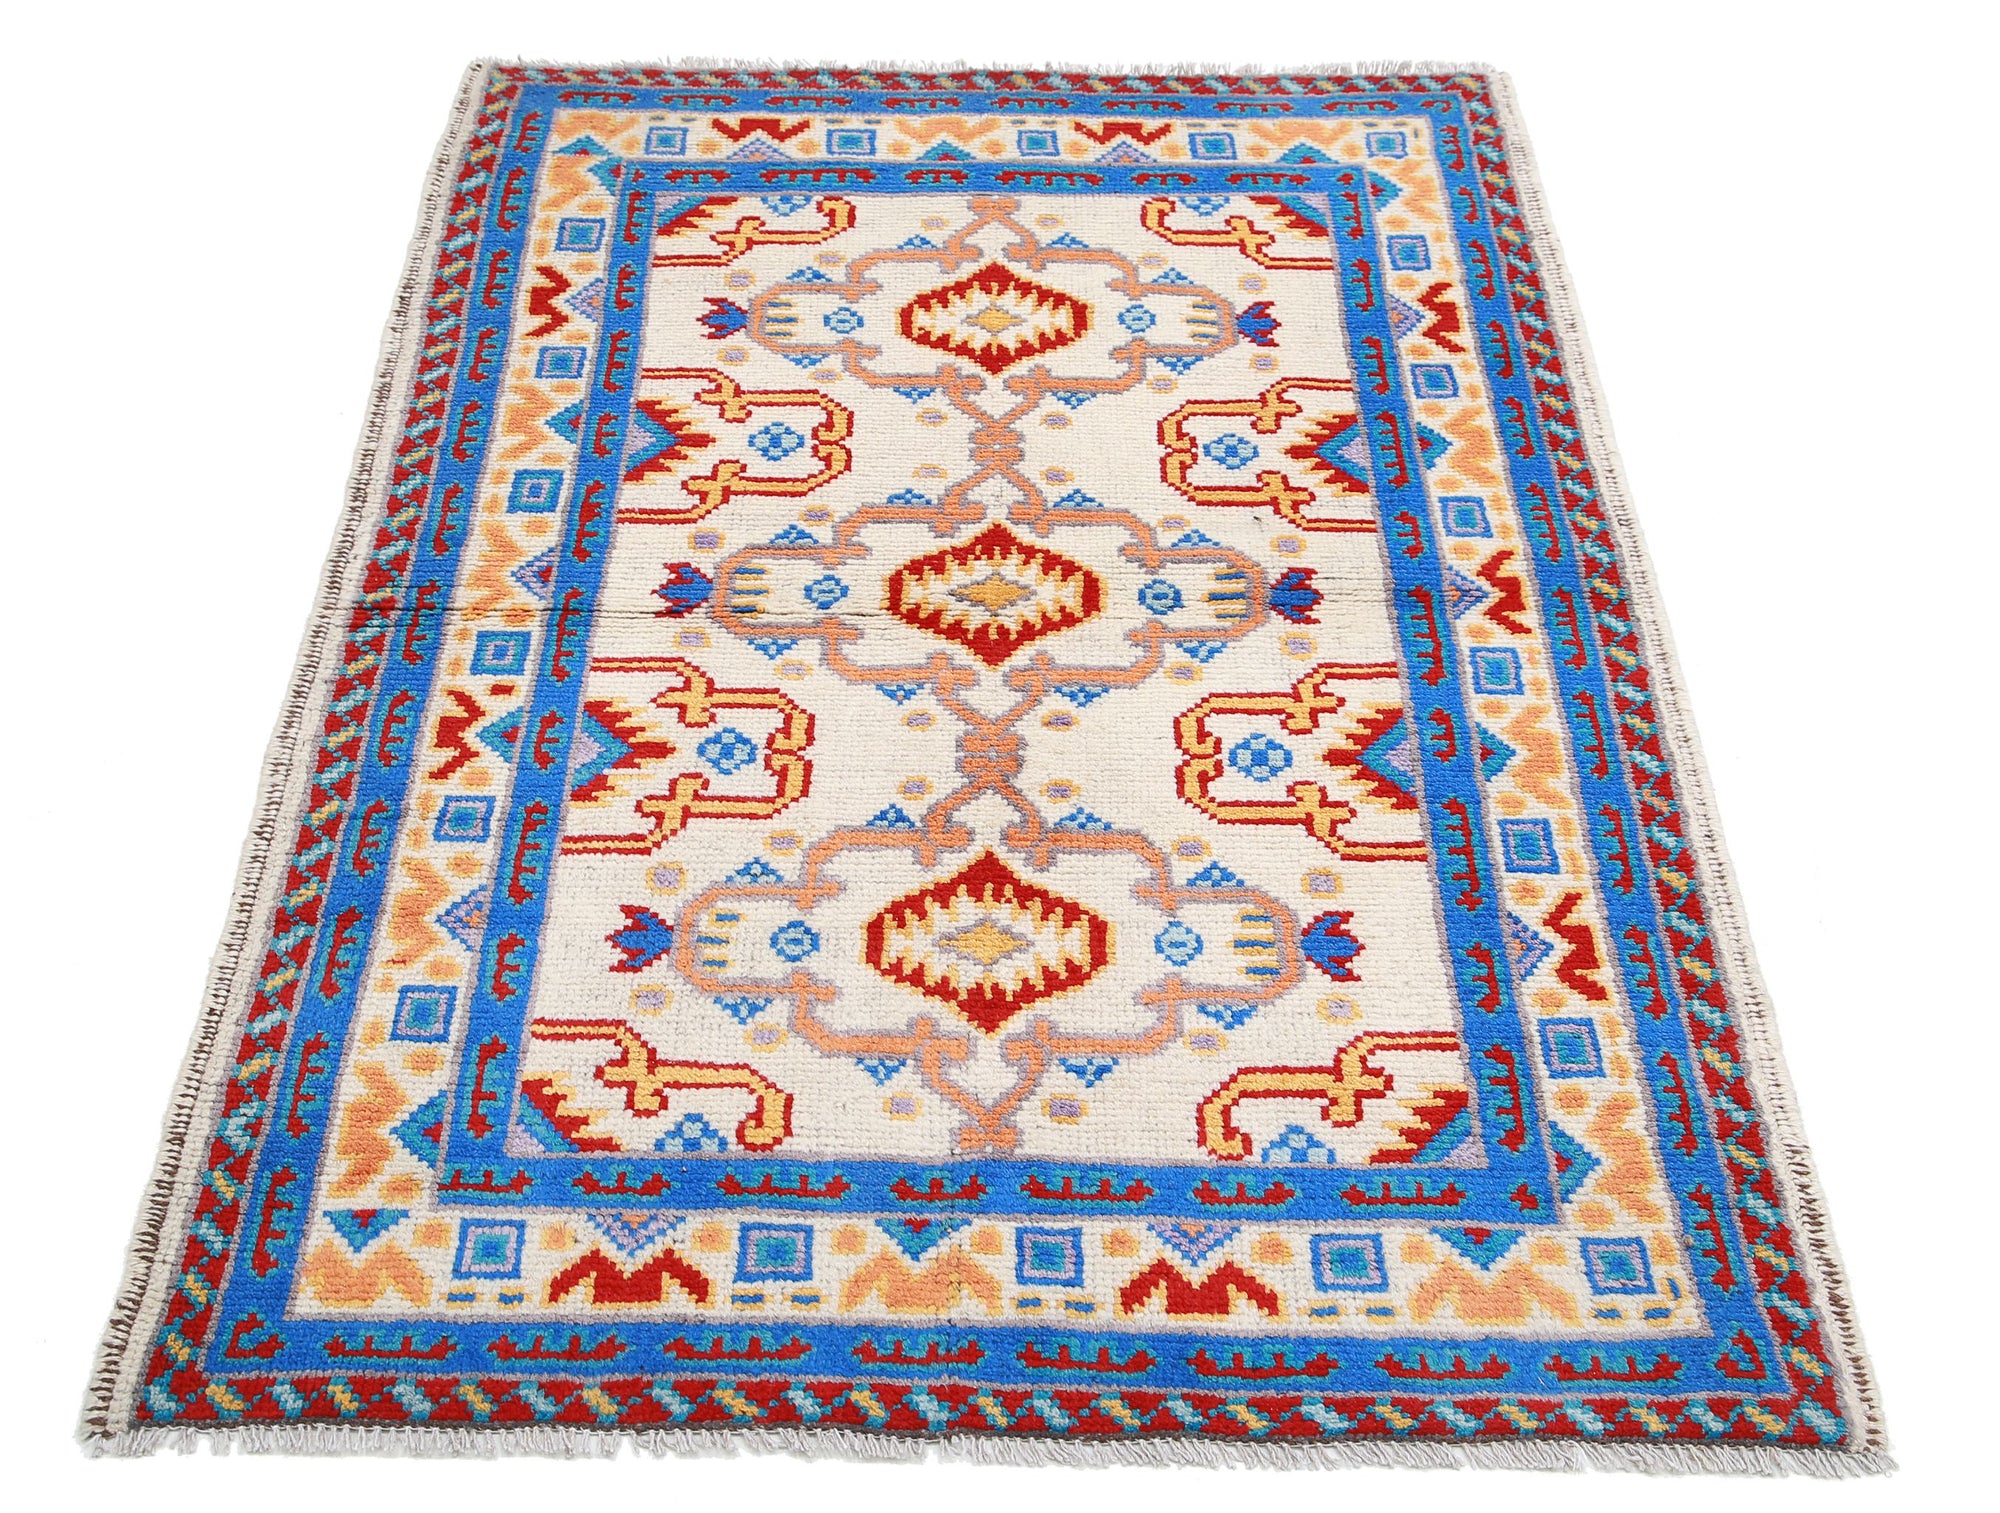 Revival-hand-knotted-qarghani-wool-rug-5014206-3.jpg